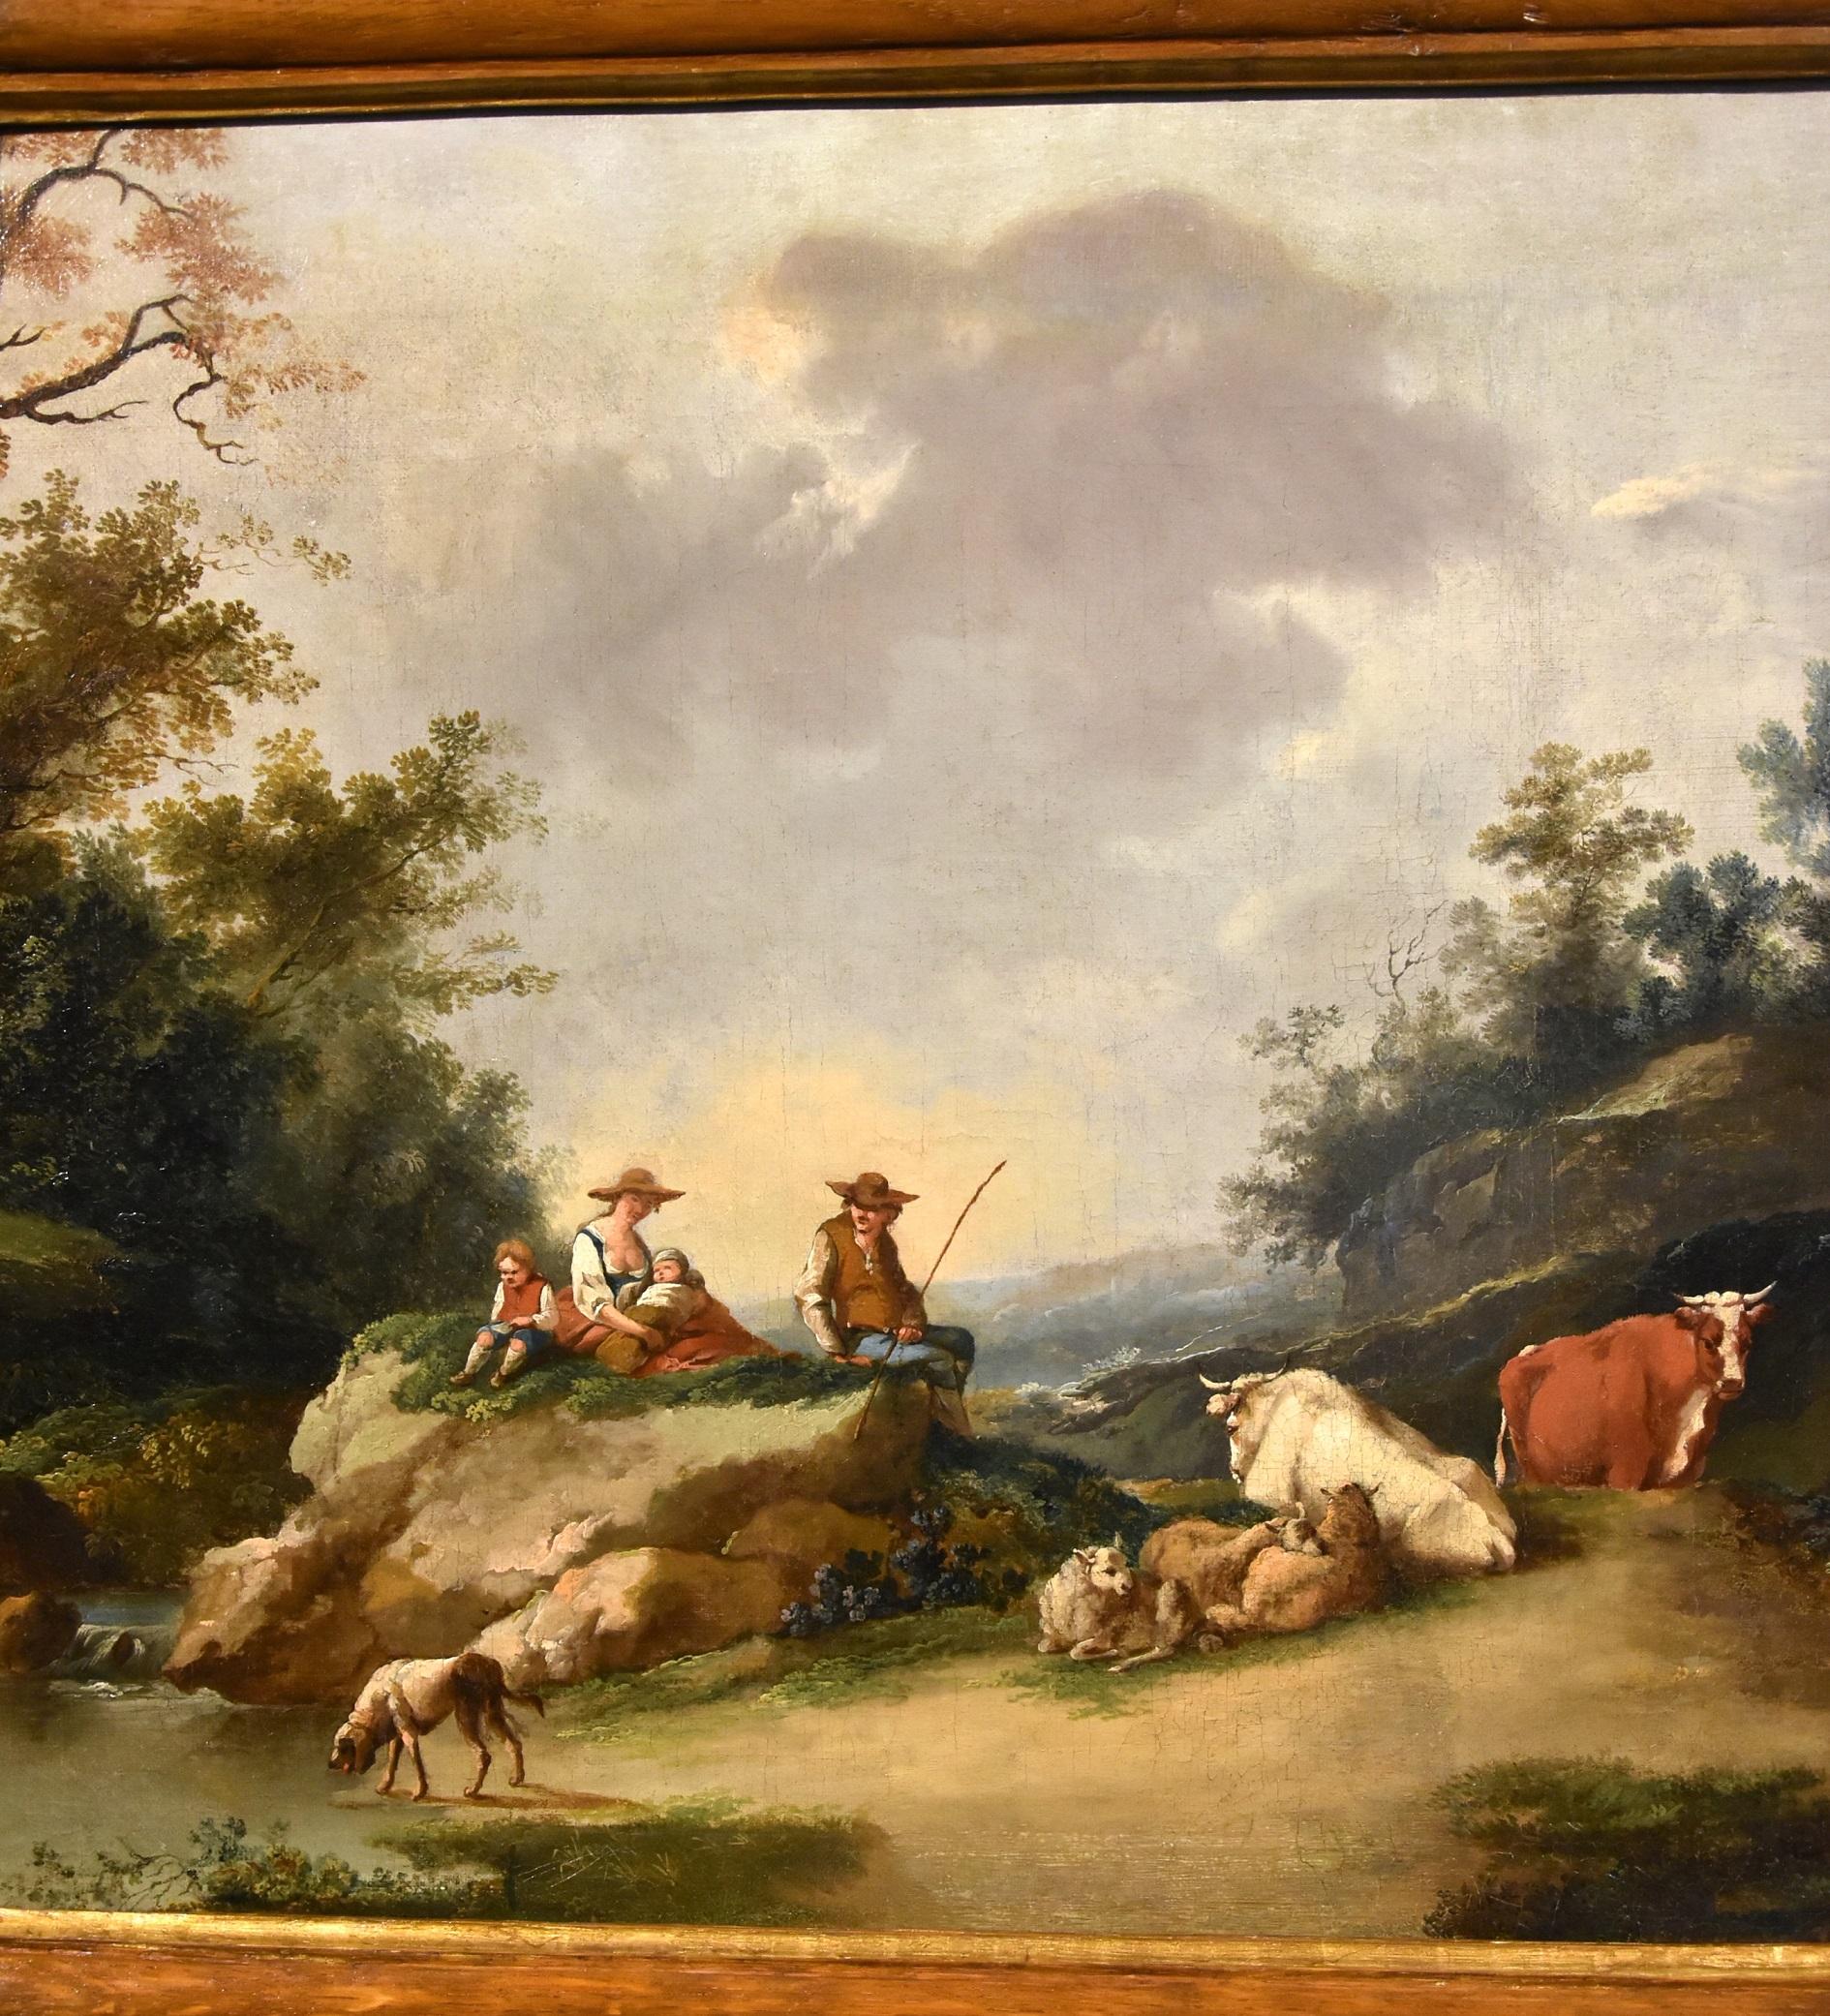 Landscape Zuccarelli Paint Oil on canvas Old master 18th Century Italian View For Sale 2